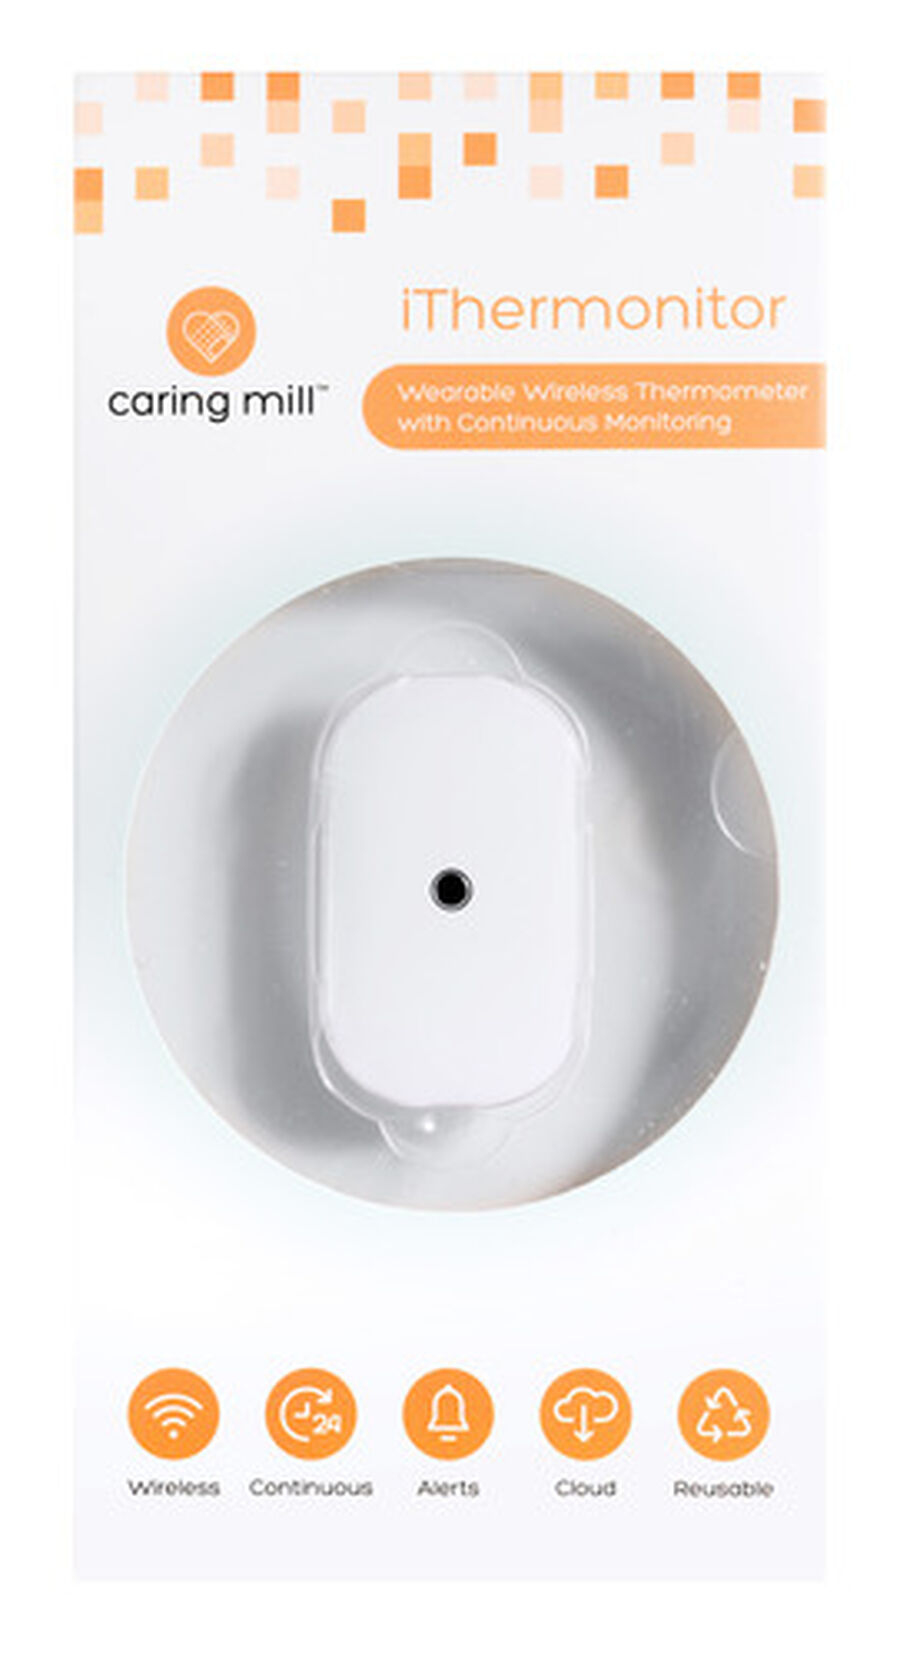 Caring Mill® Wireless iThermonitor, , large image number 1